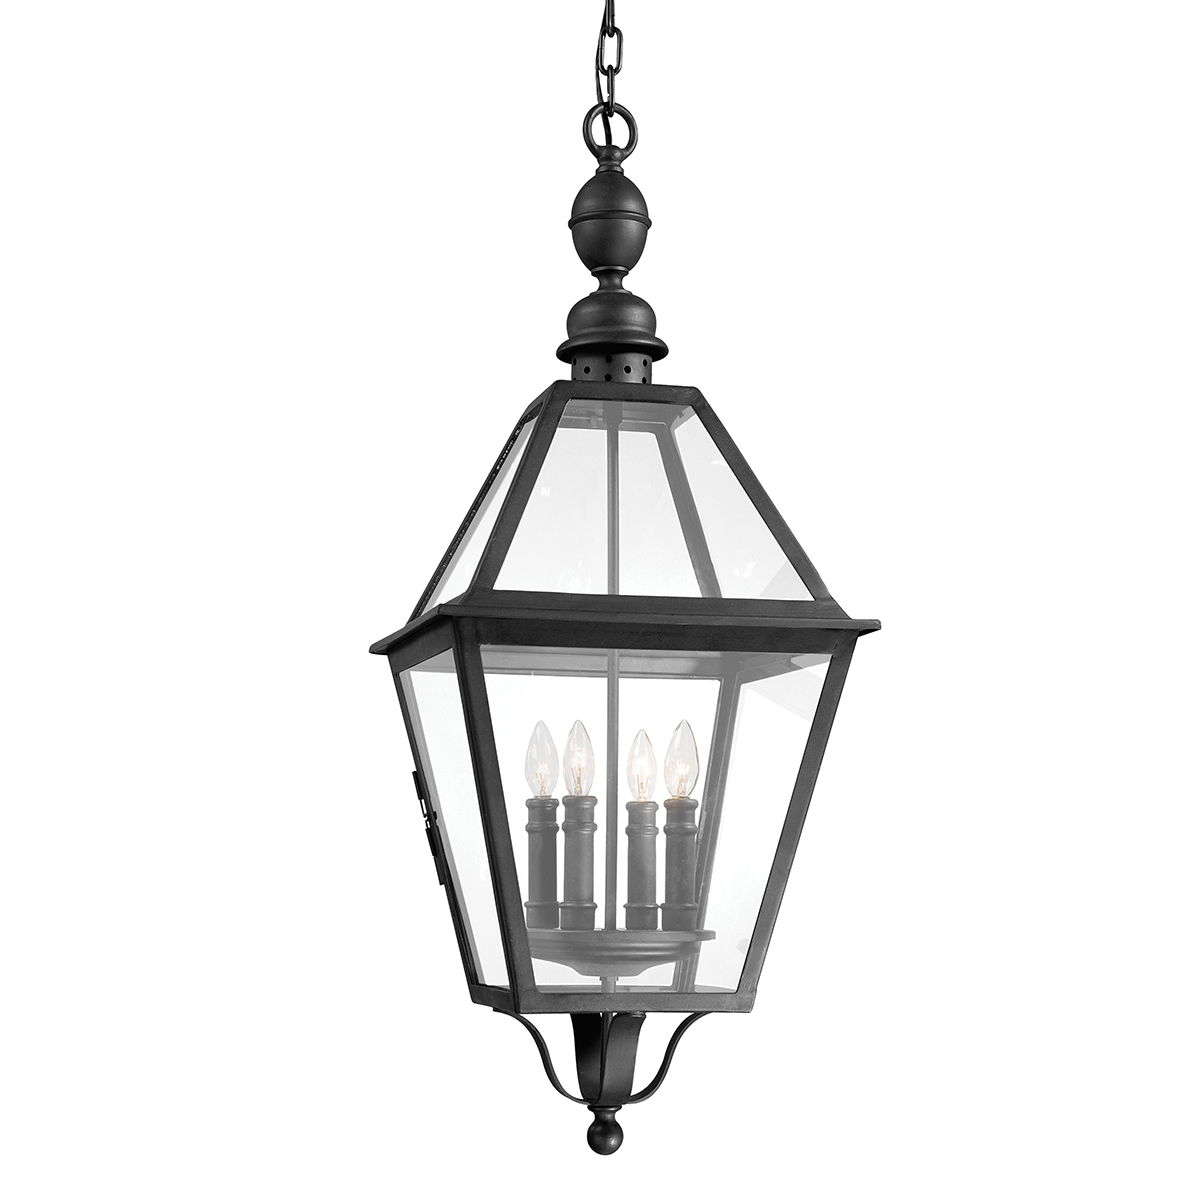 Troy Lighting TOWNSEND 4LT HANGING LANTERN EXTRA LARGE F9628 Outdoor Light Fixture l Hanging Troy Lighting NATURAL BRONZE  